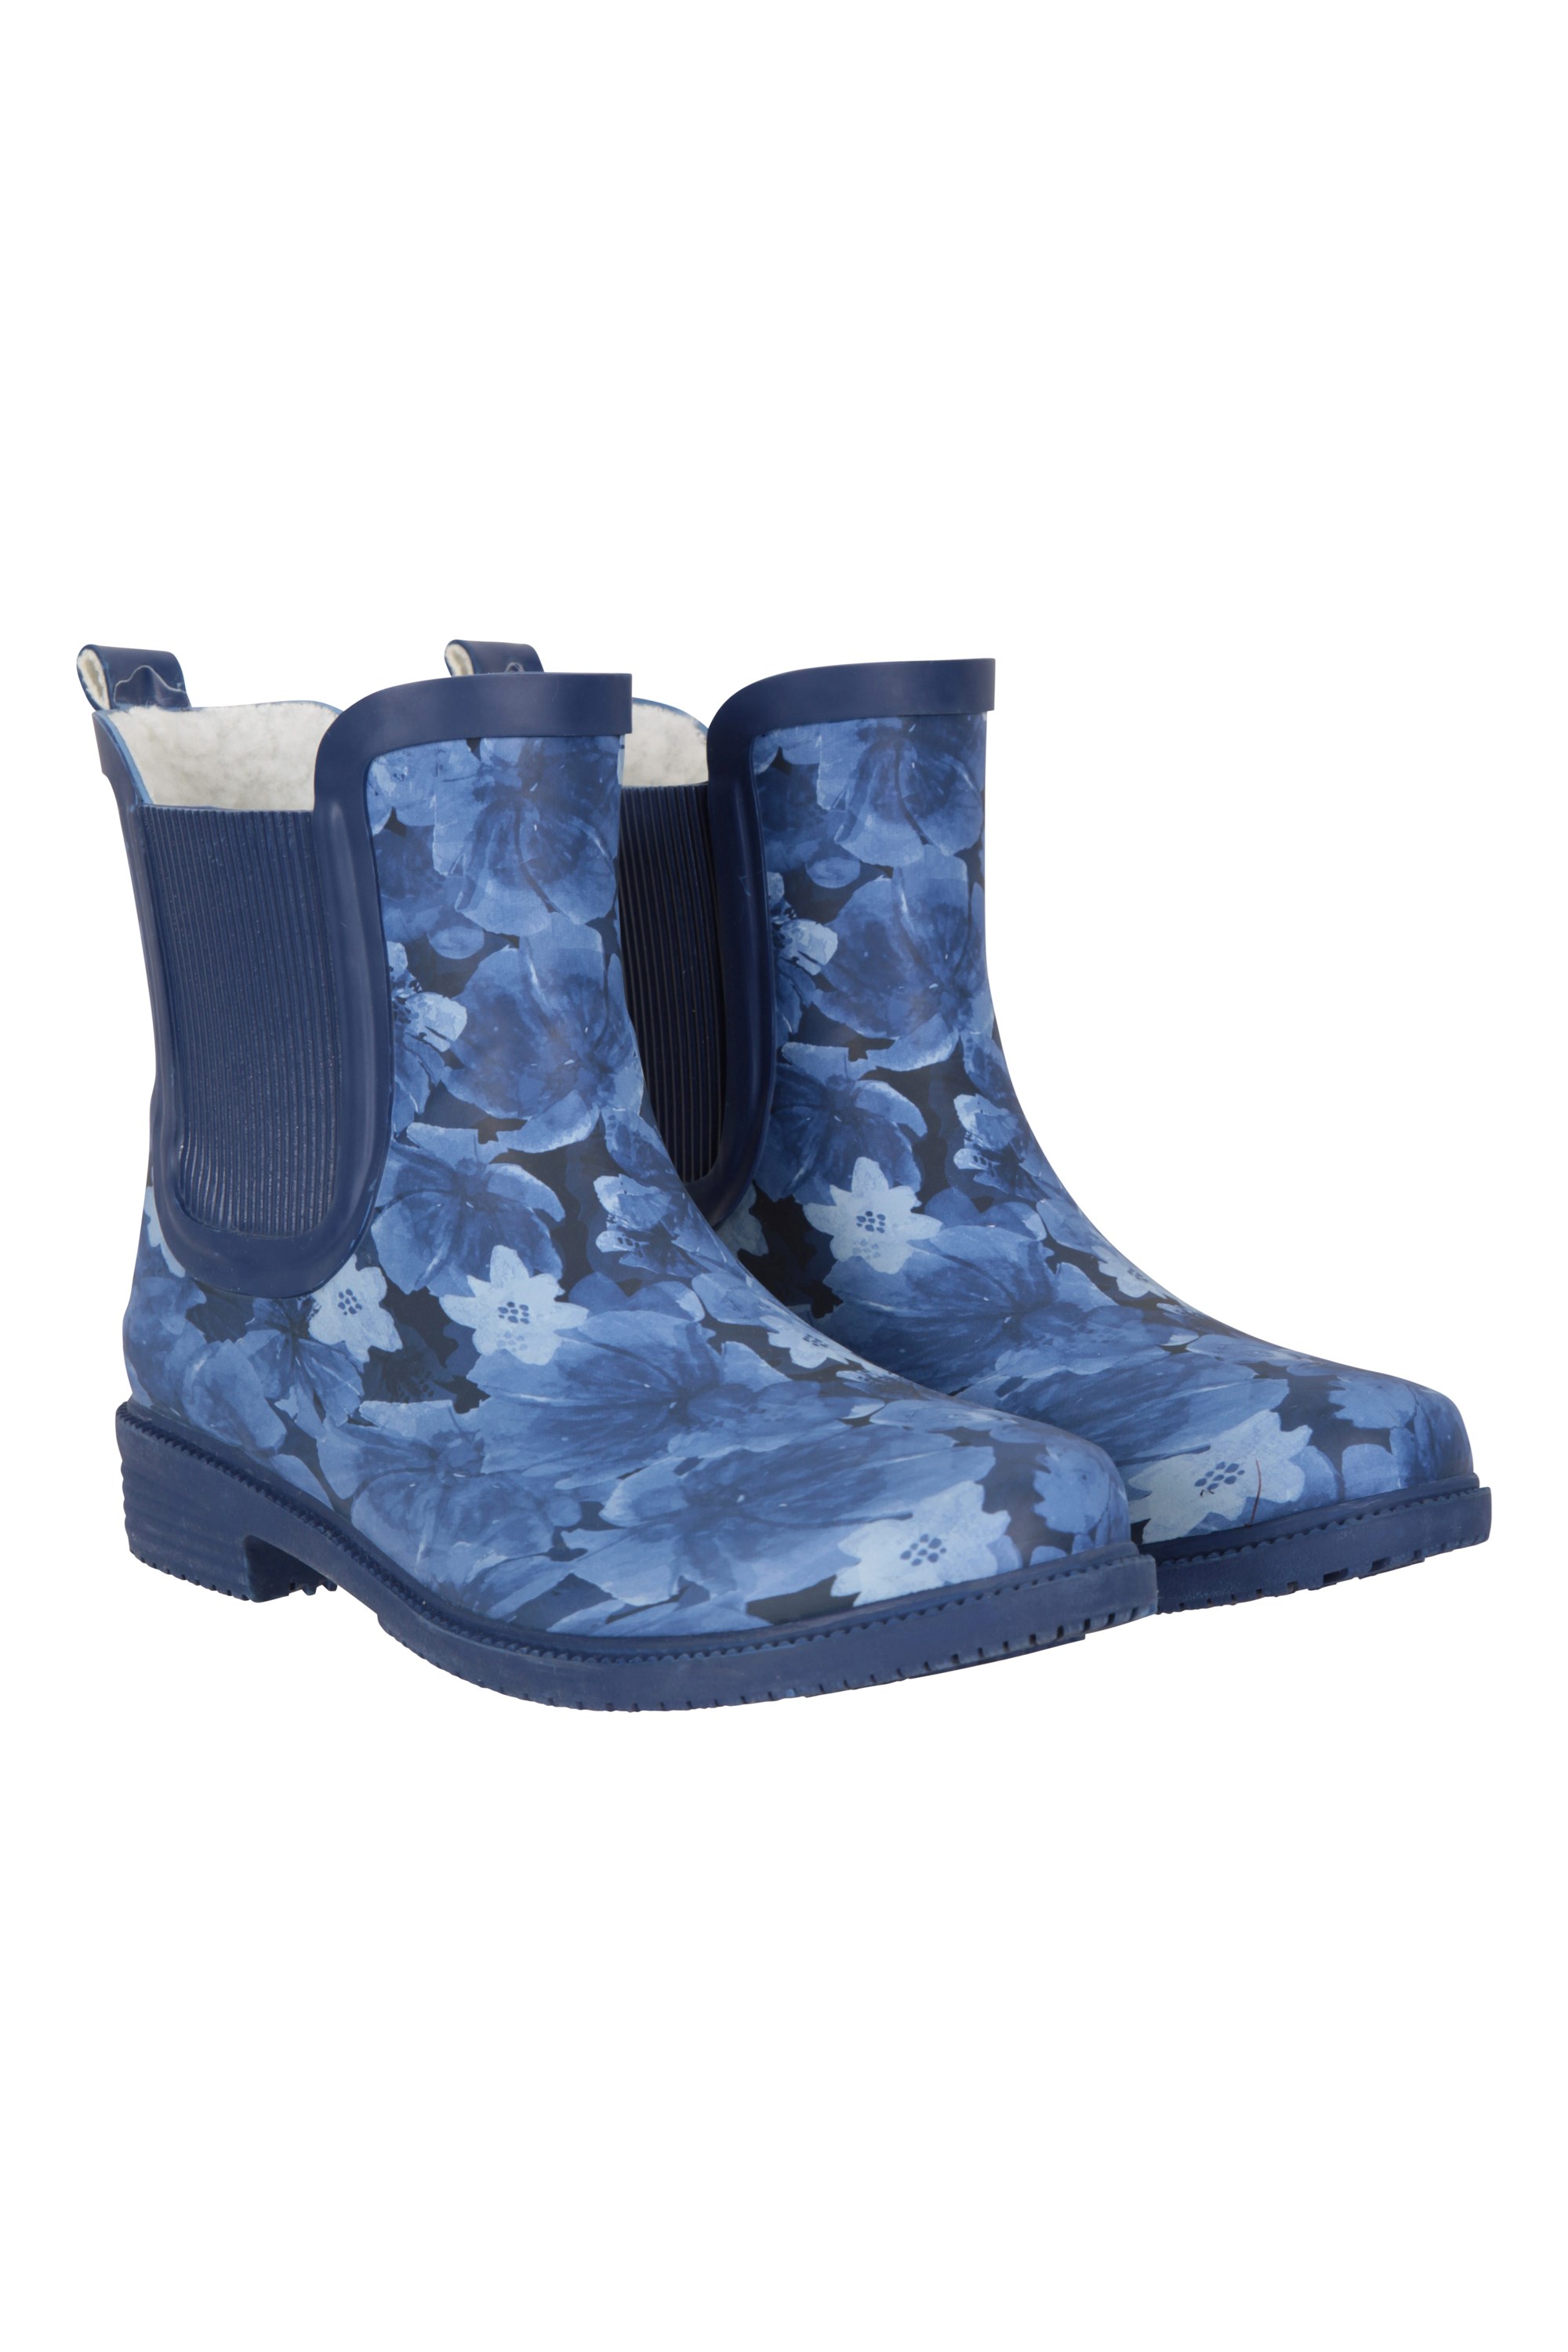 Womens Printed Winter Rubber Ankle Rain Boots - Dark Blue